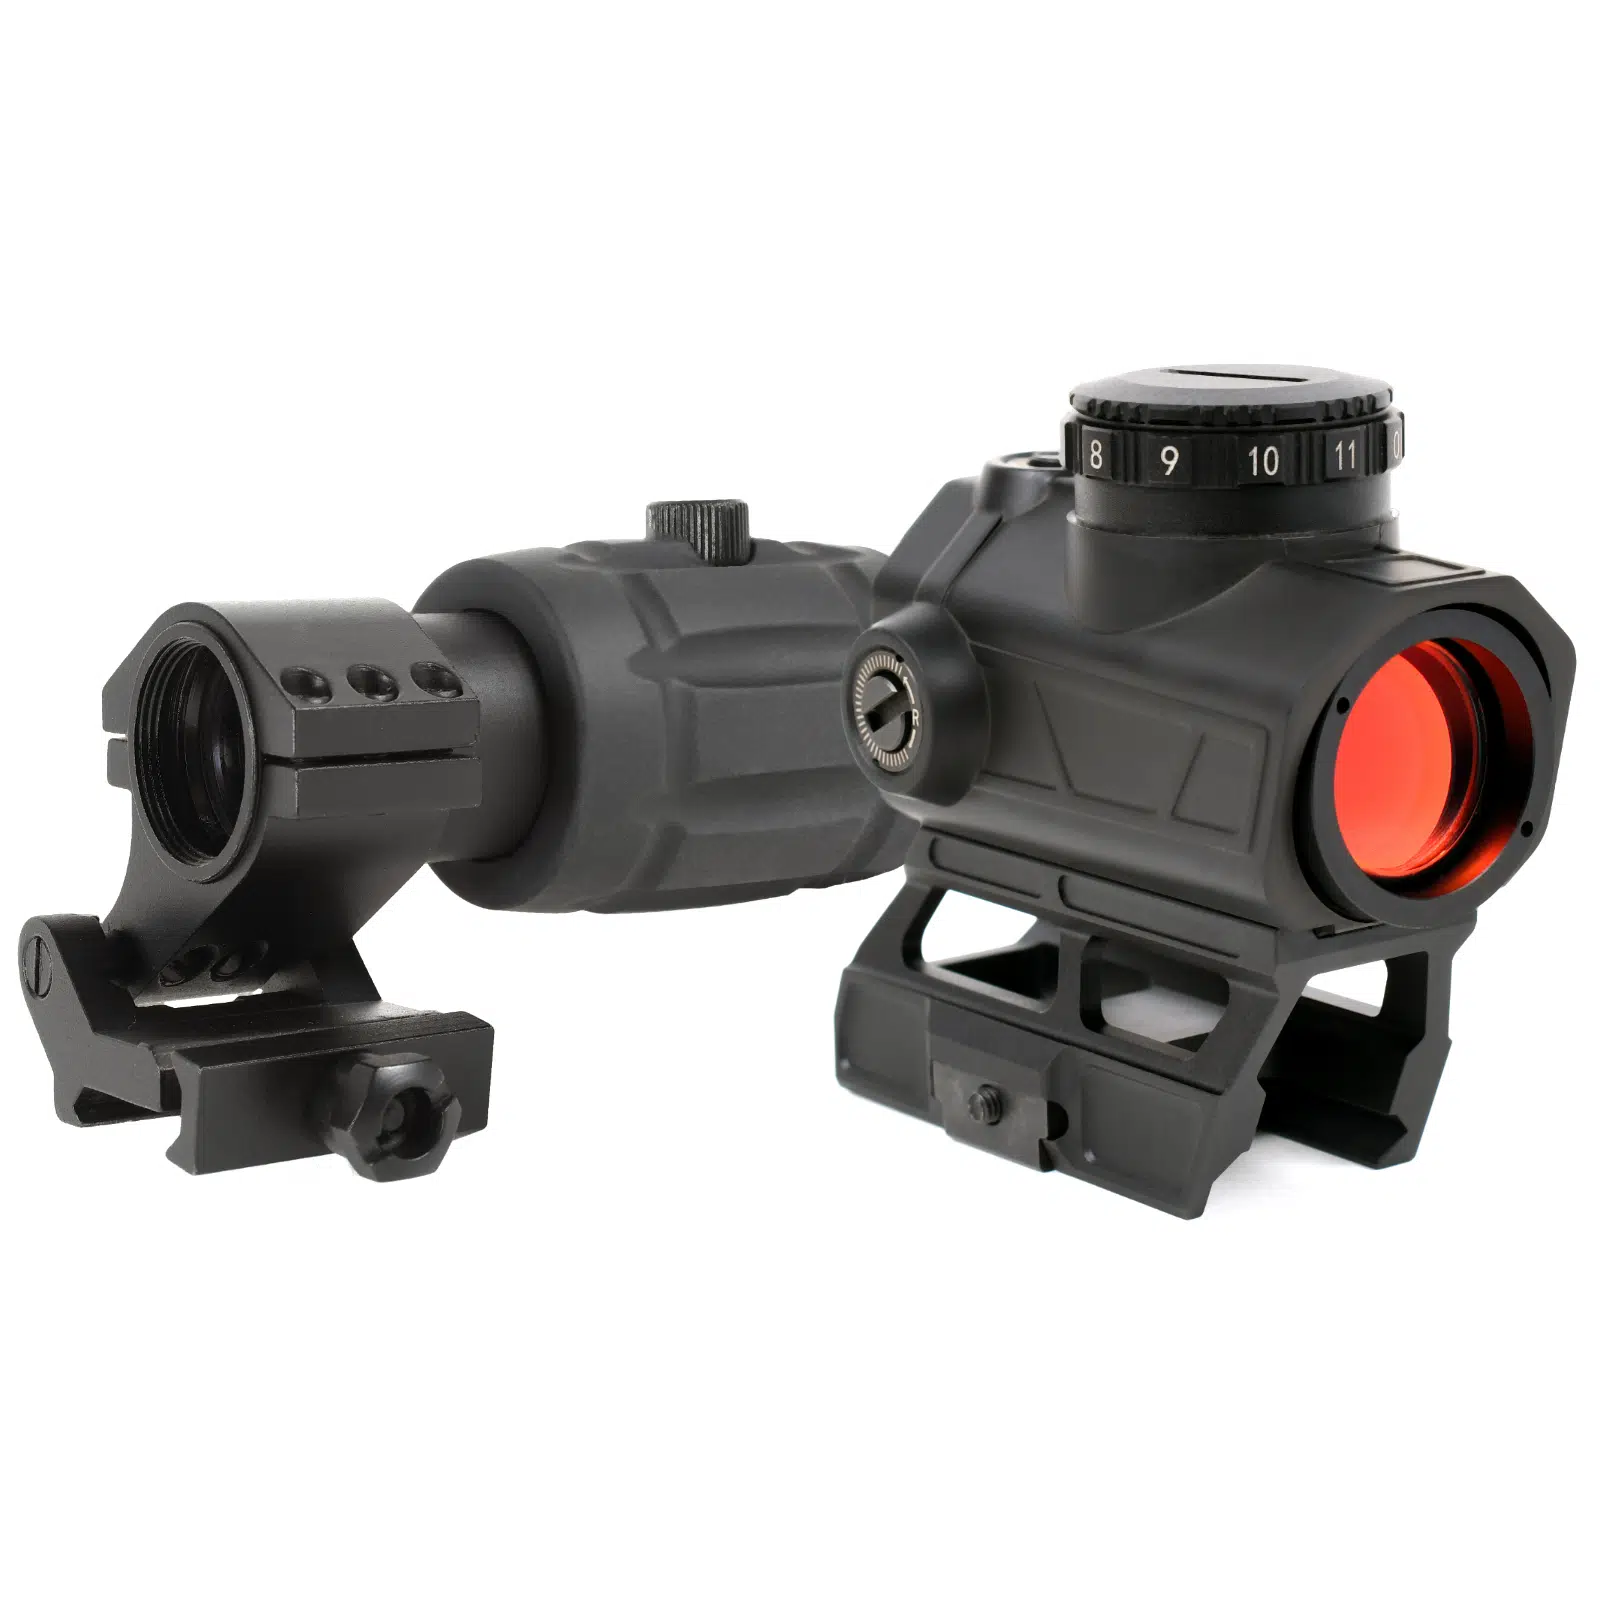 AT3™ ALPHA + RRDM Red Dot Kit – Includes Red Dot Sight & 3x Magnifier